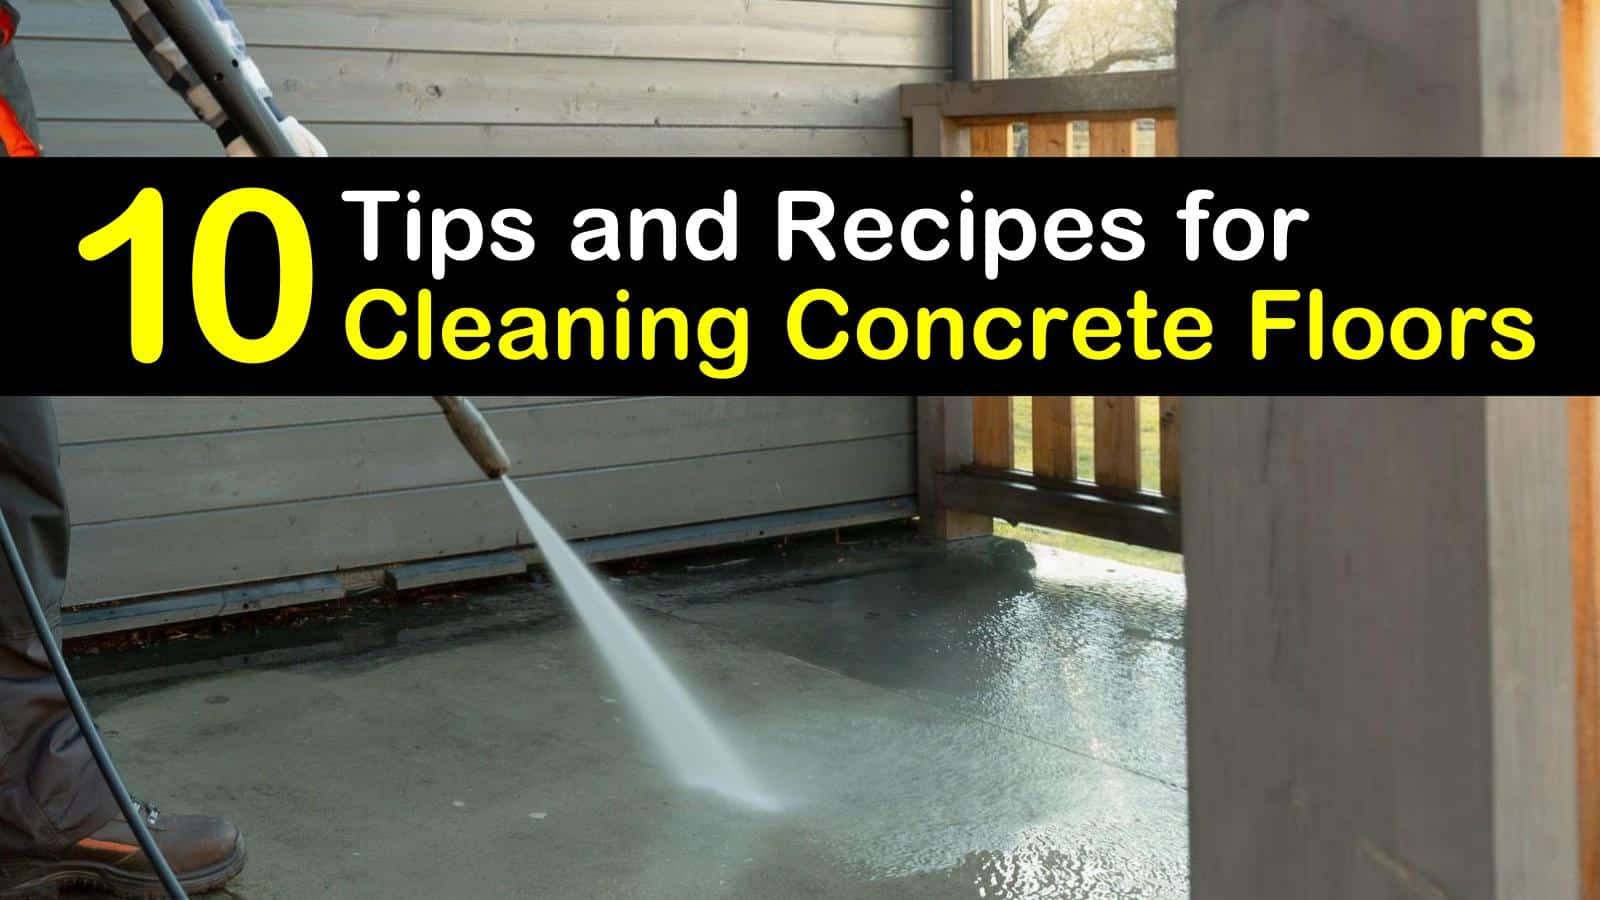 Removing Paint From Concrete Patio Using Muriatic Acid • Fence Ideas Site